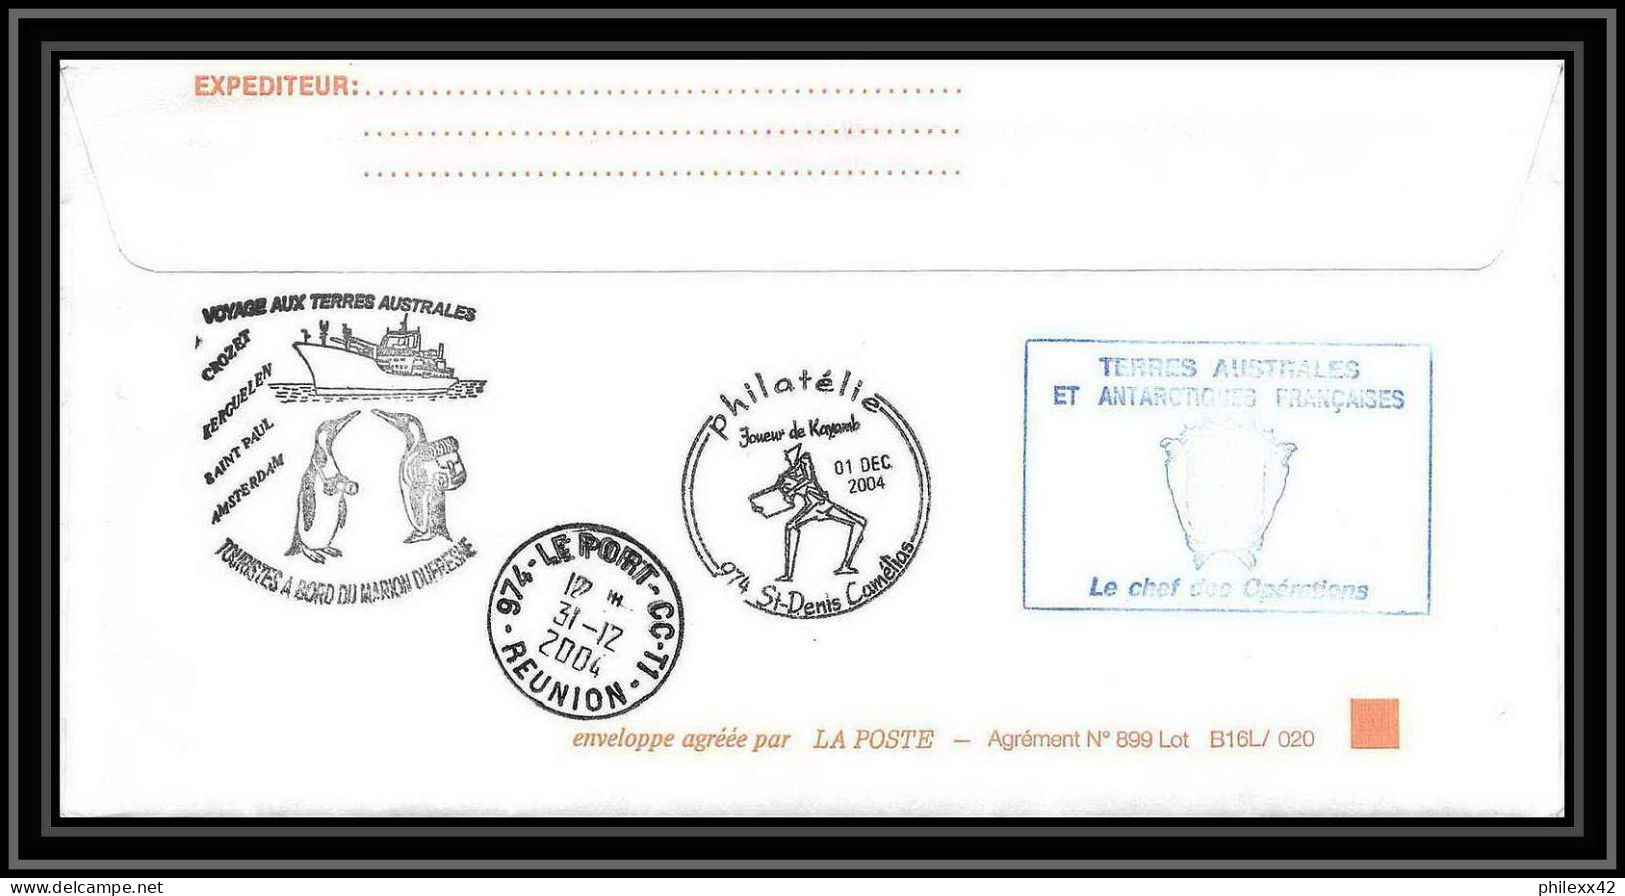 2483 ANTARCTIC Terres Australes TAAF Lettre Cover Dufresne 2 Signé Signed OP 2004/4 N°392 21/12/2004 Helilagon - Helicopters